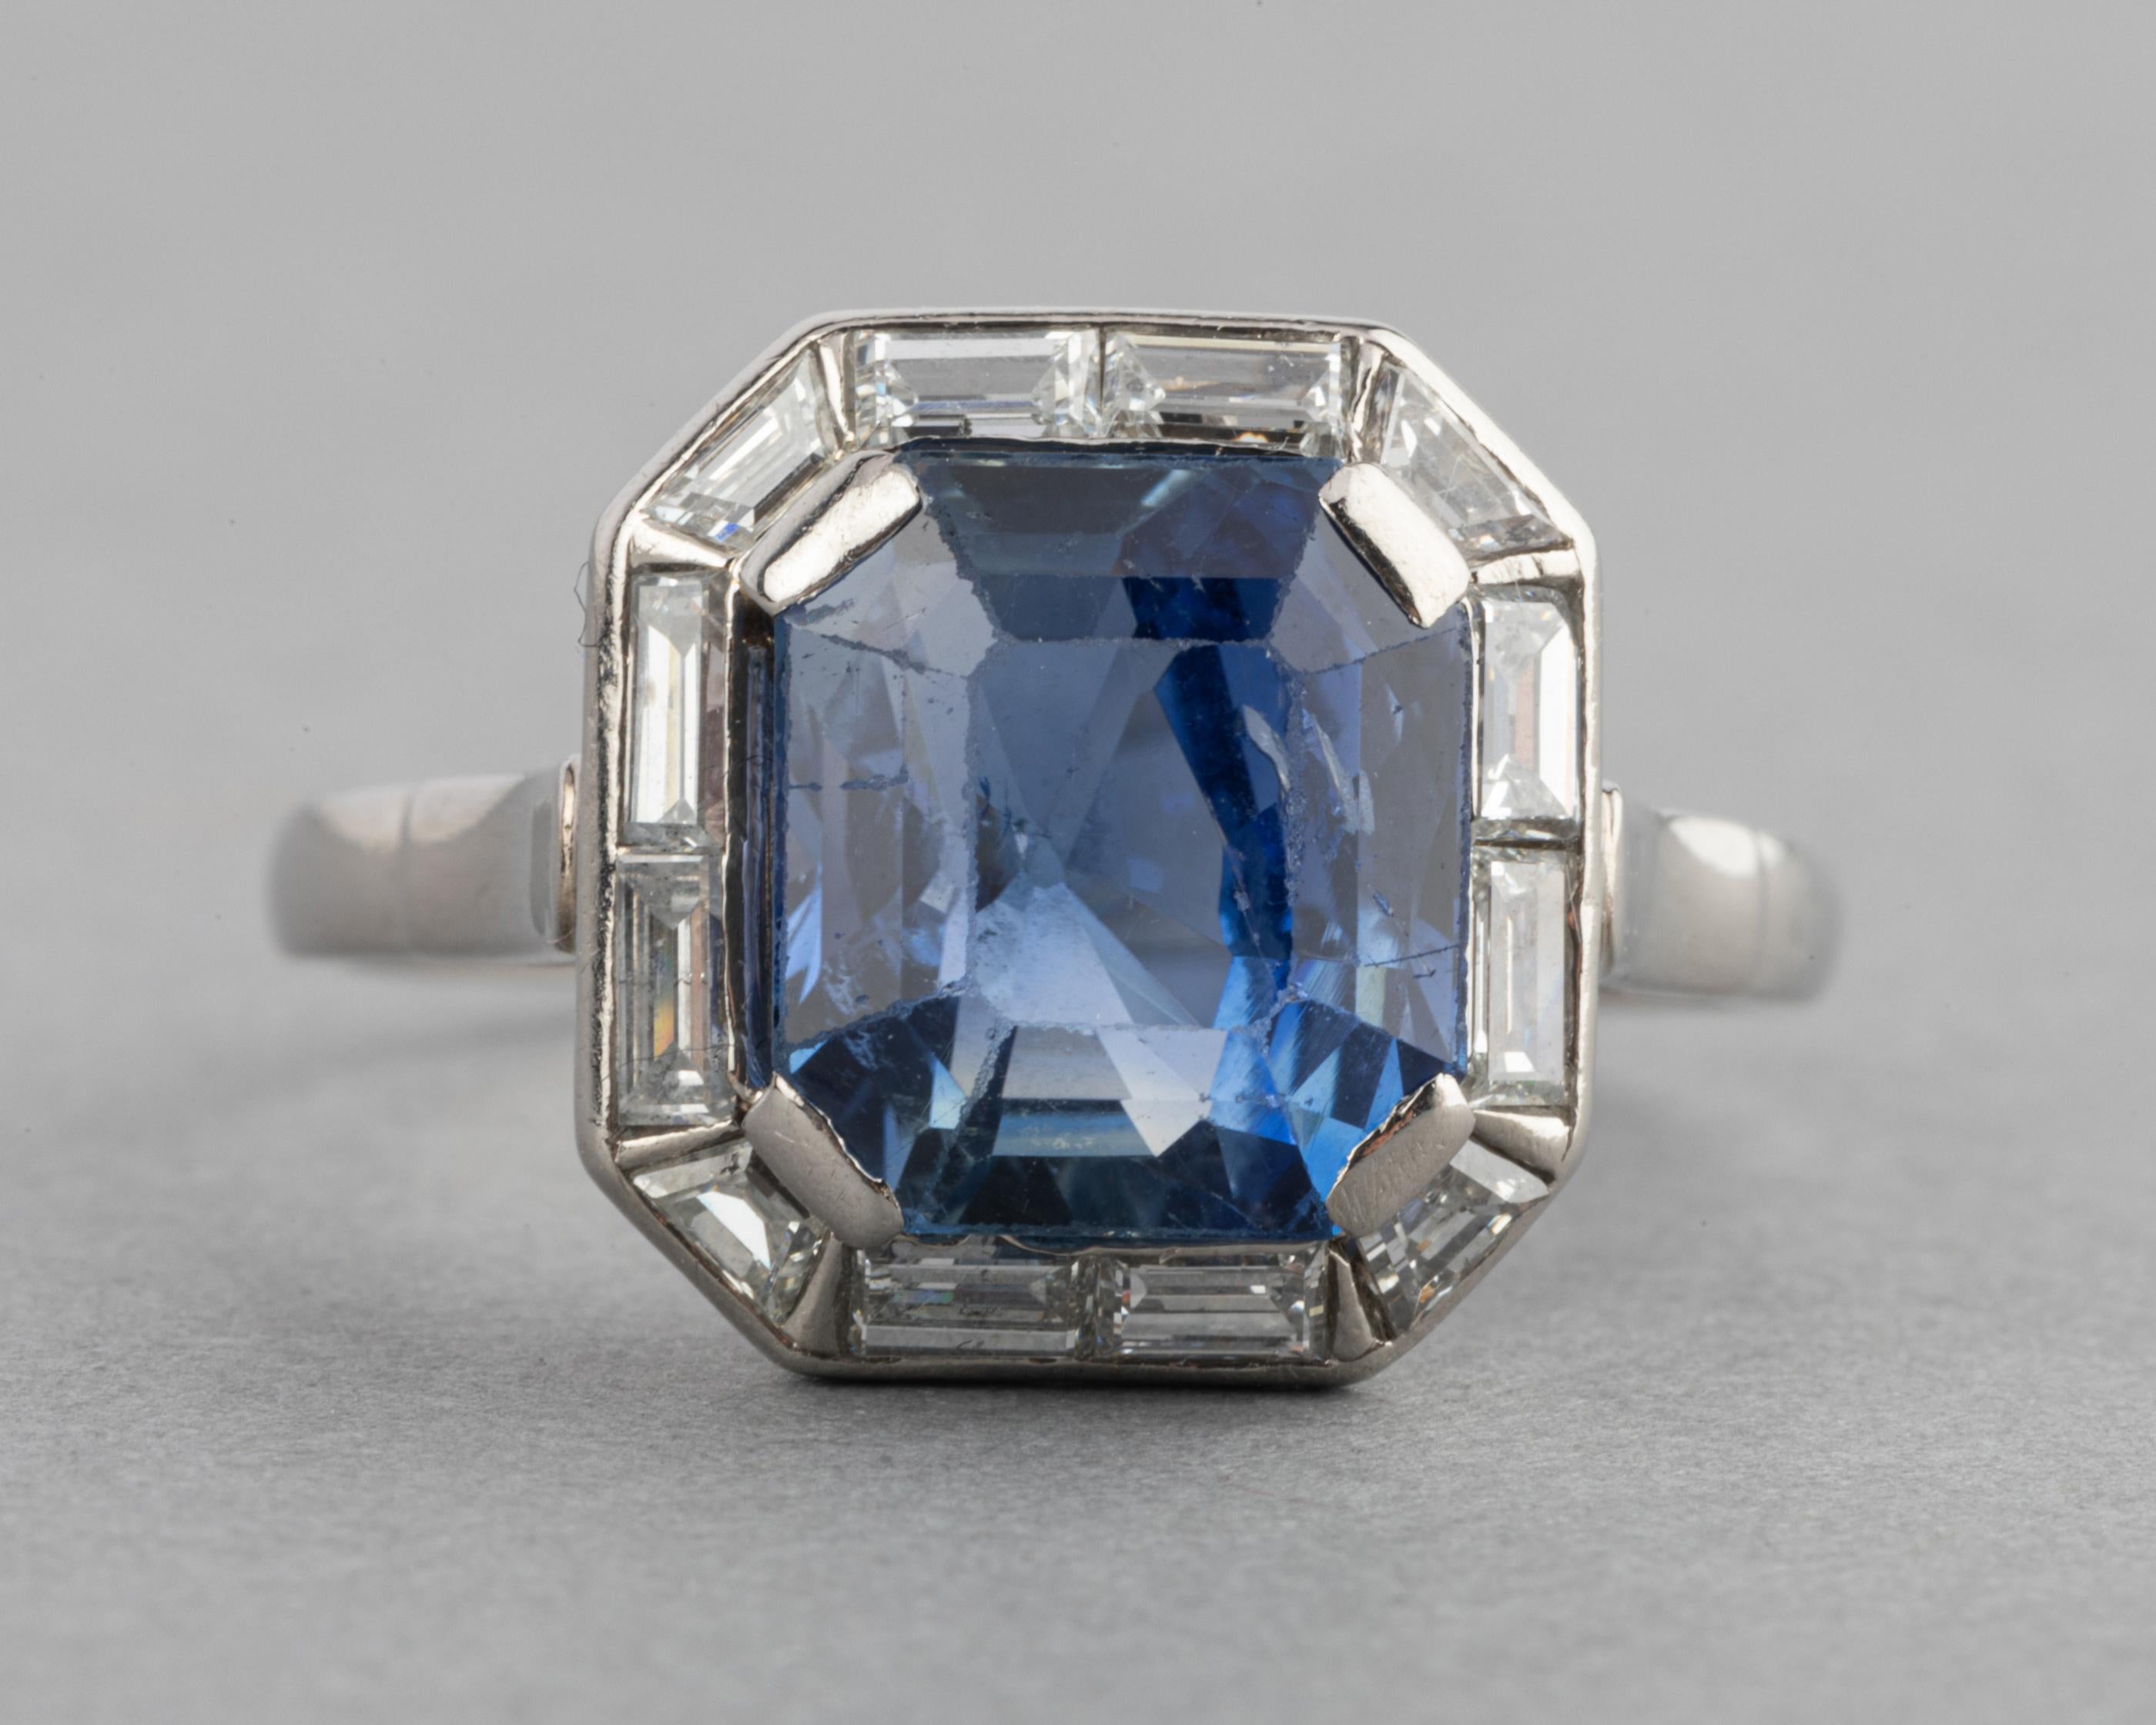 French Cut 4 Carat Sapphire and Diamonds French Art Deco Ring